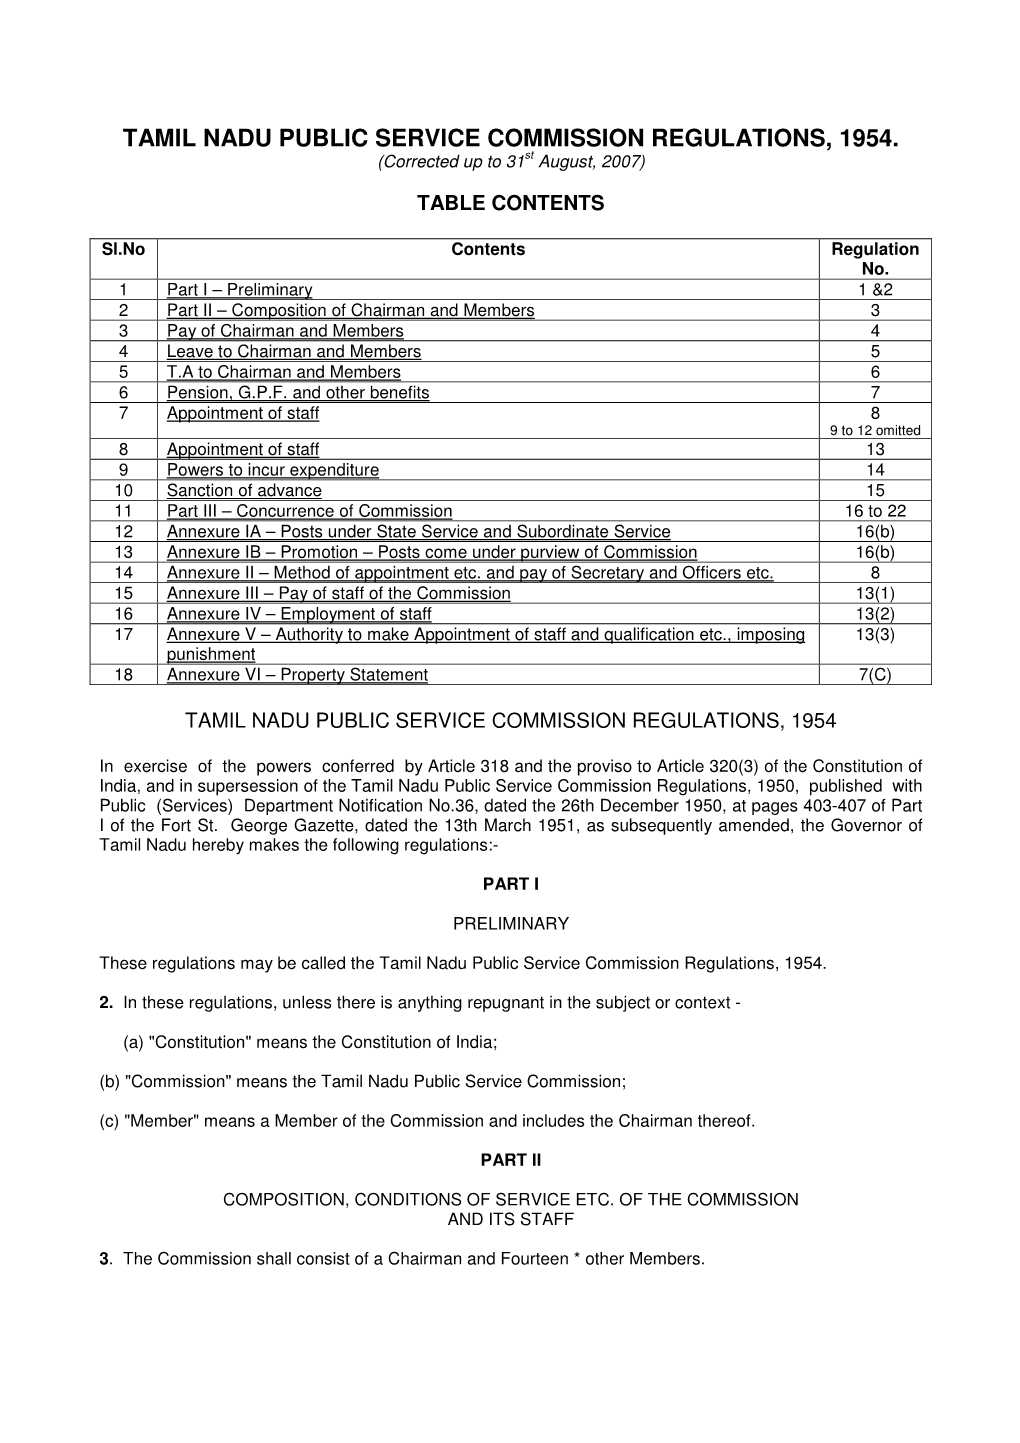 TAMIL NADU PUBLIC SERVICE COMMISSION REGULATIONS, 1954. (Corrected up to 31 St August, 2007)